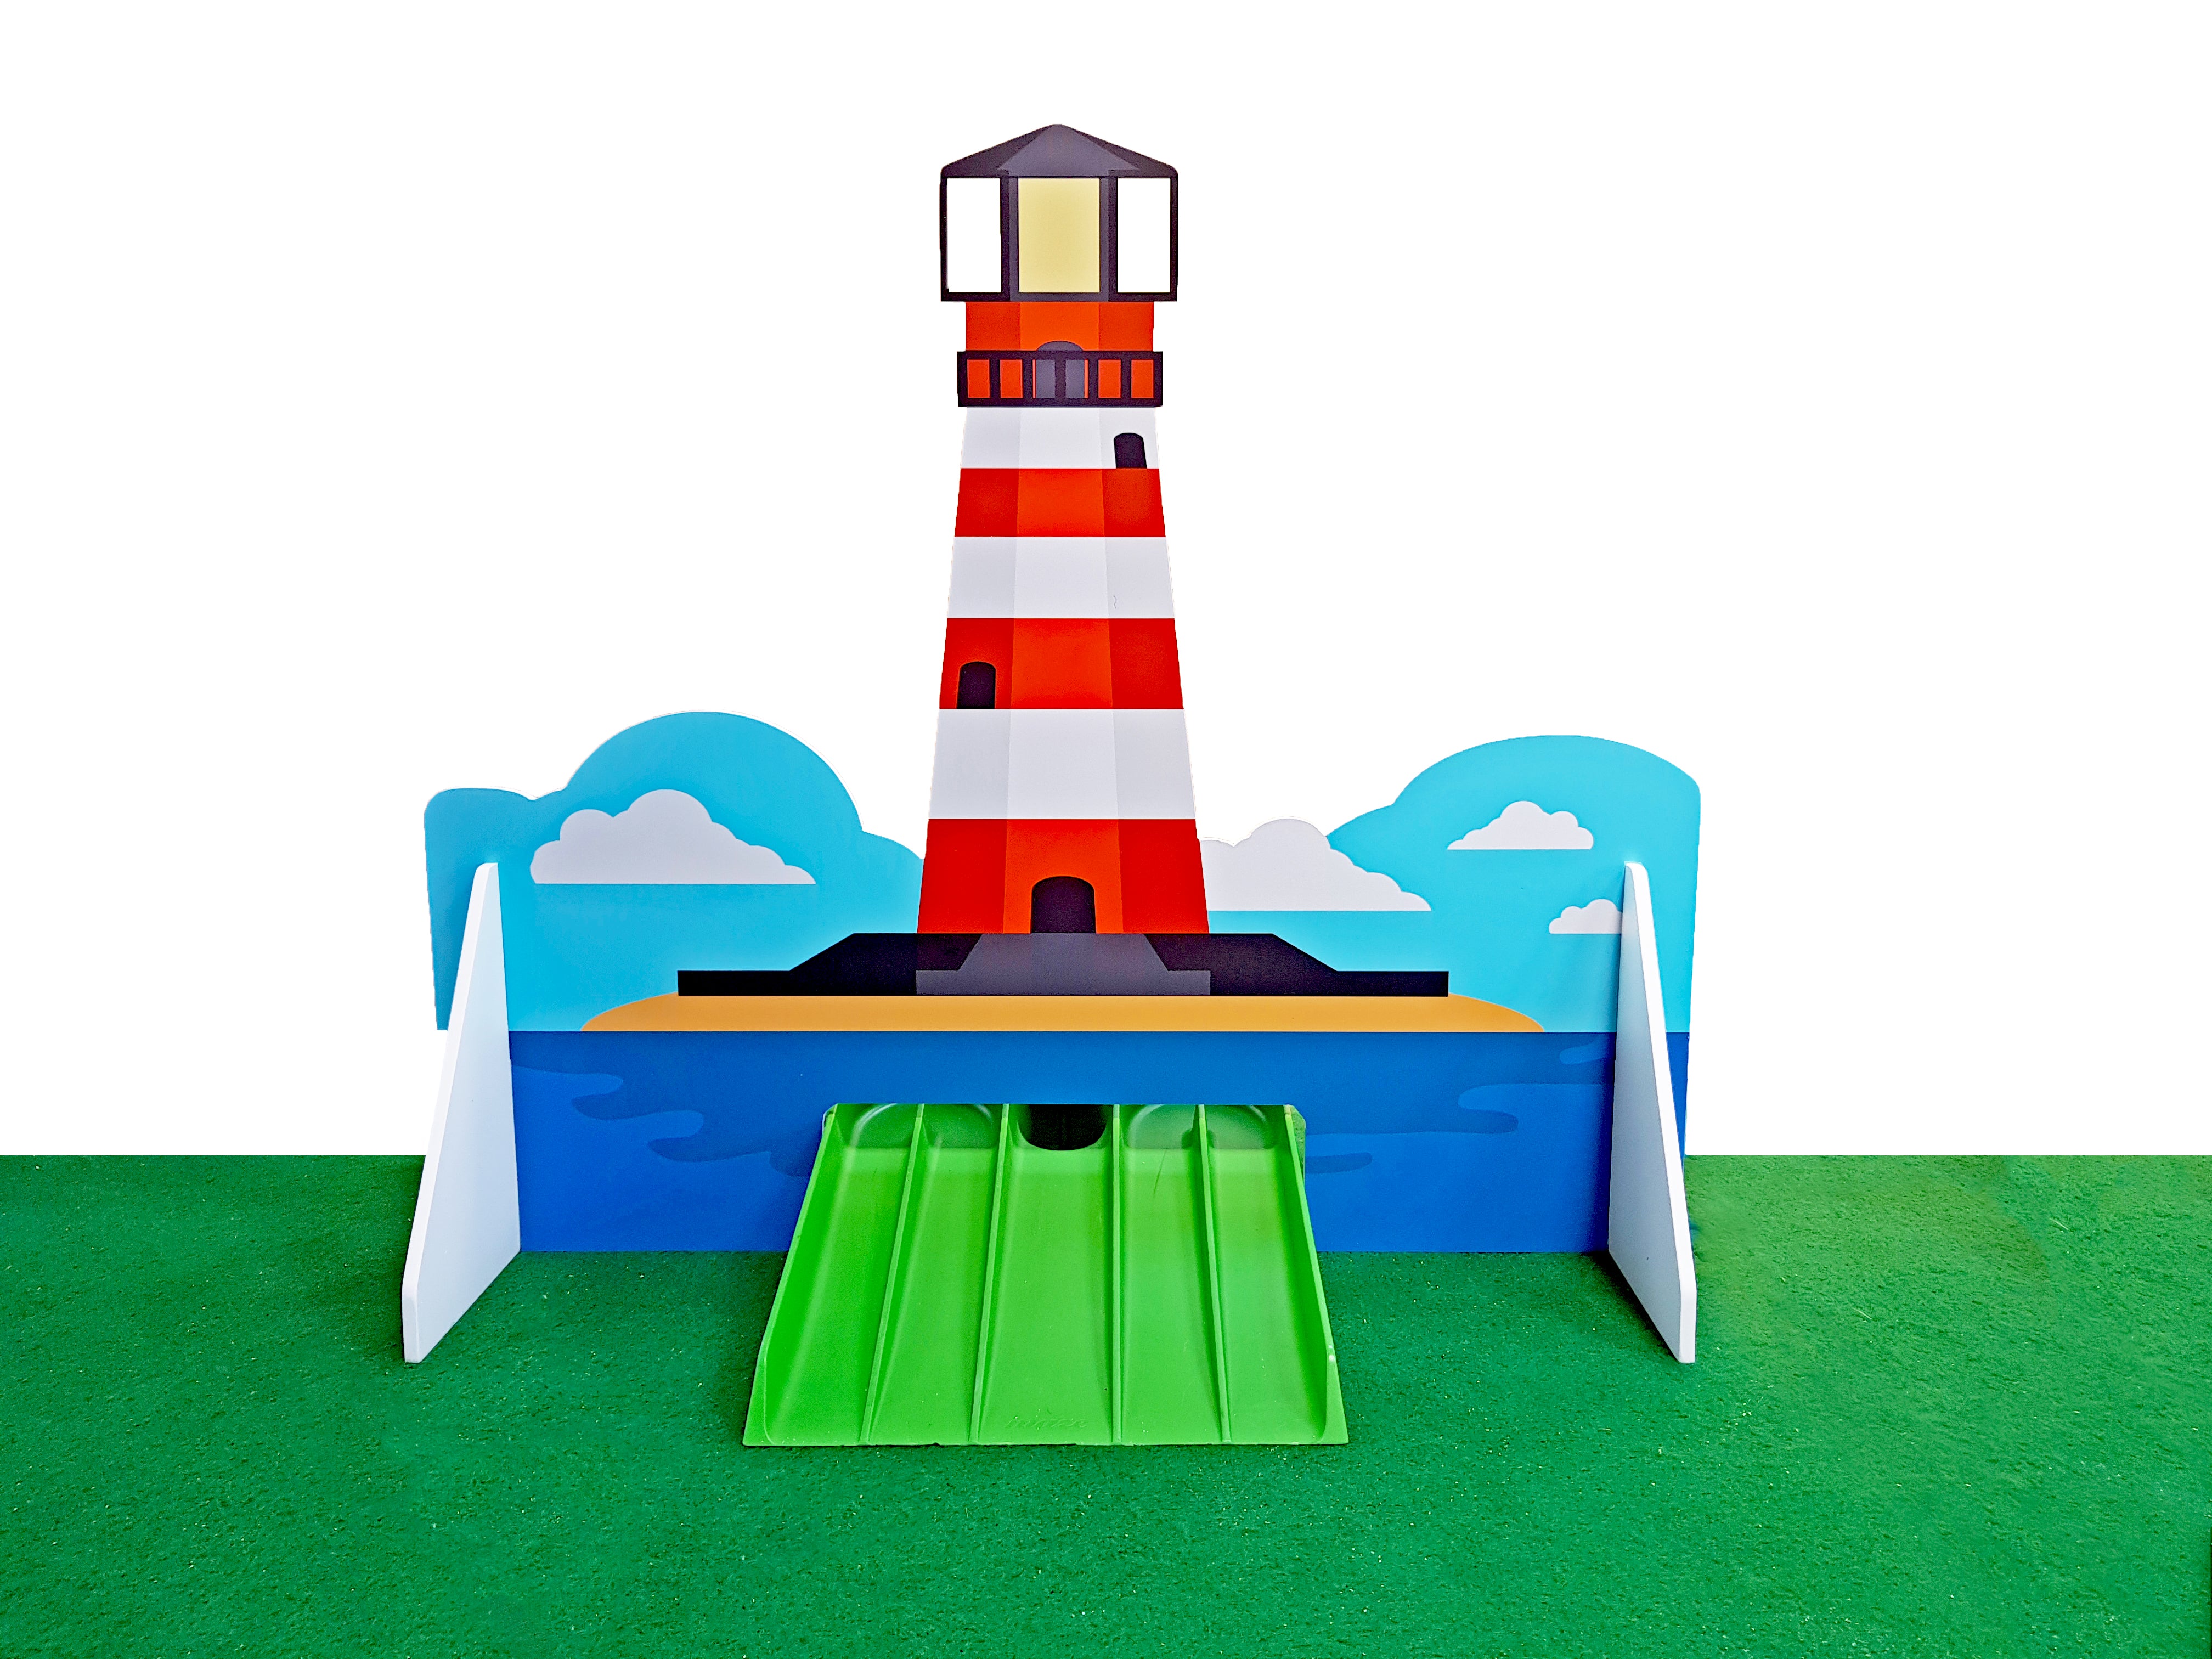 Lighthouse and Maze Obstacle